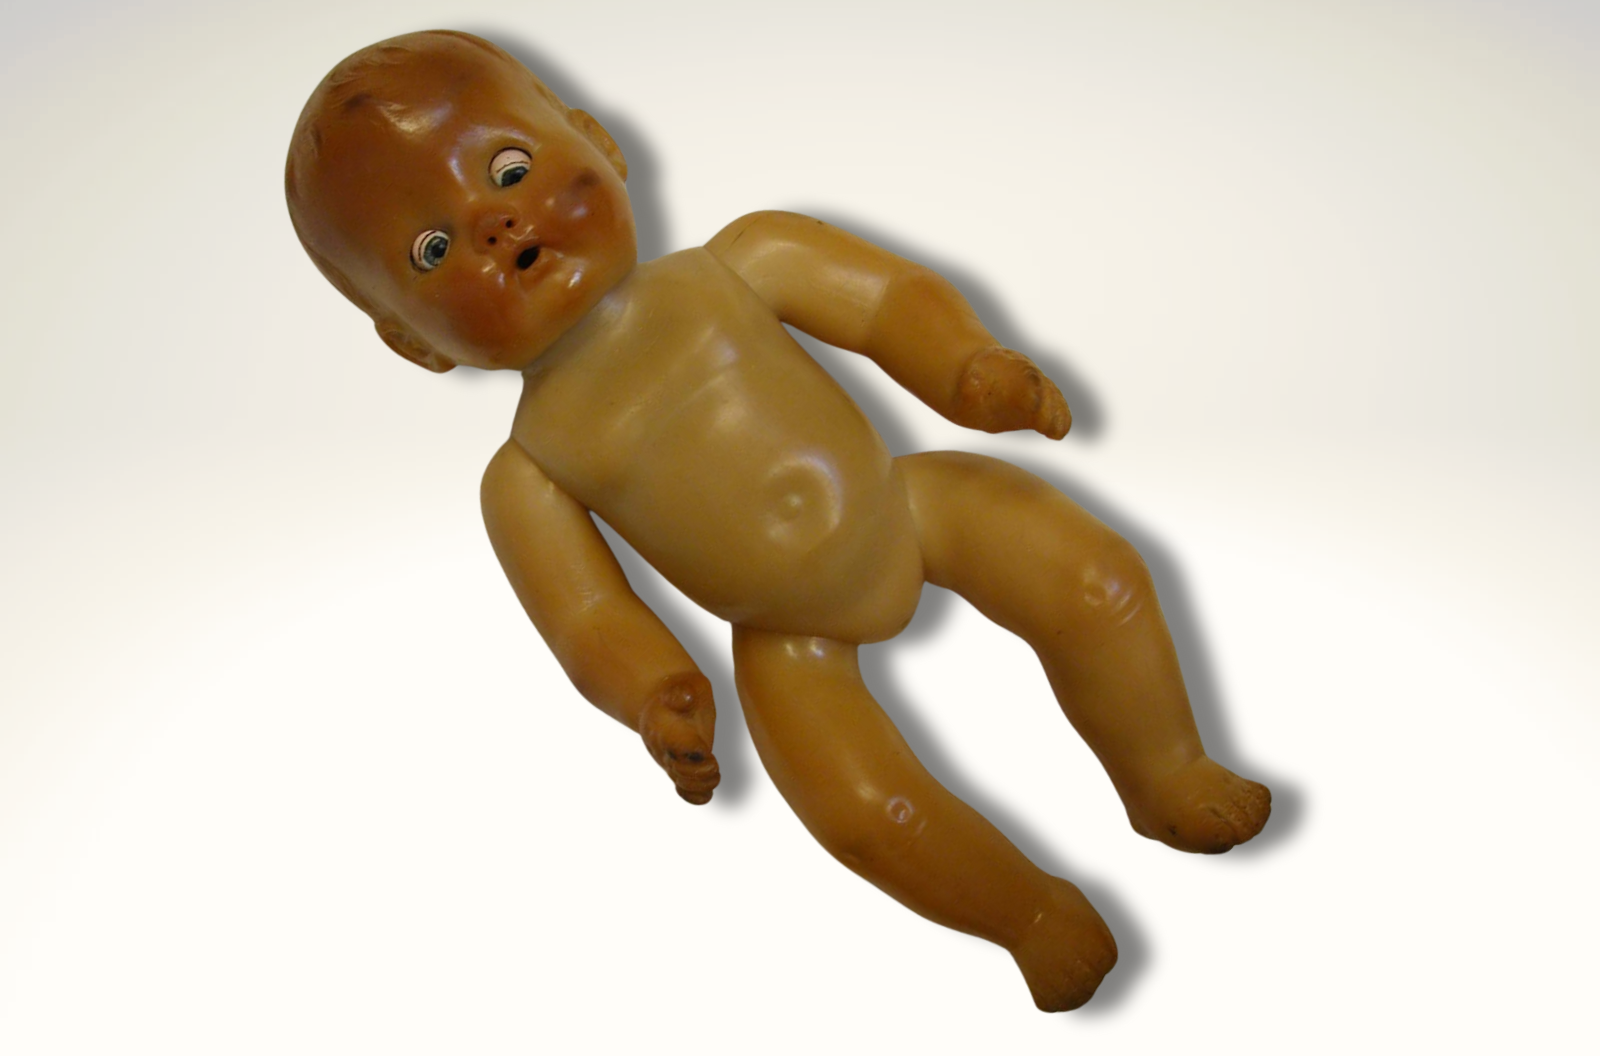 A photo of an old plastic baby doll. While most of the body is pinkish-tan, the face, hands, and legs fade into a rusty brown color.